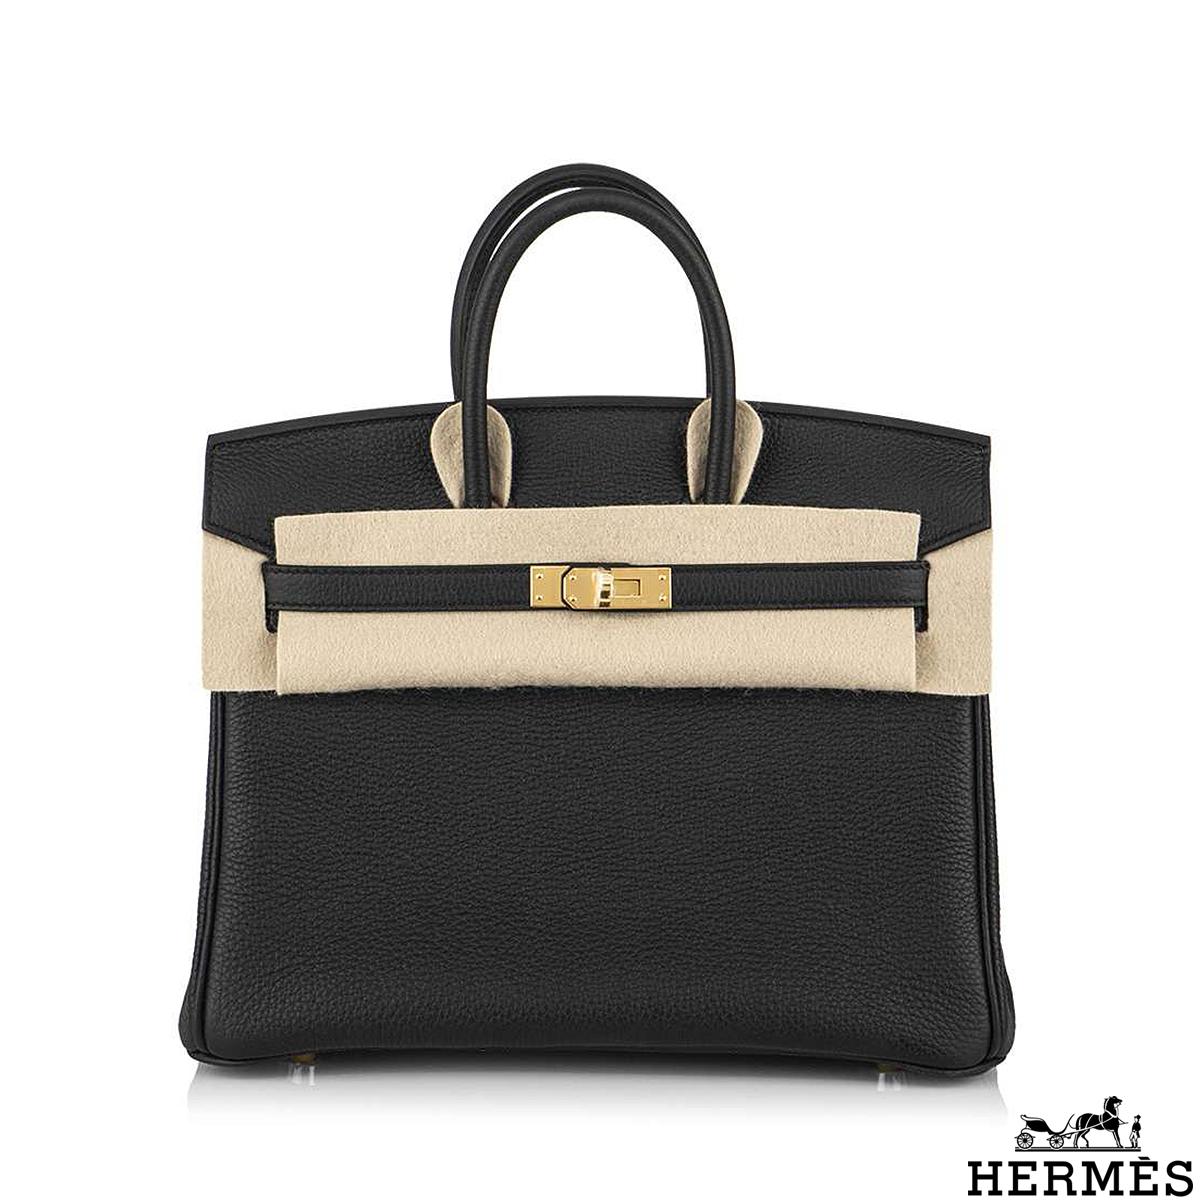 An exquisite Hermès 30cm Birkin bag. The exterior of this Birkin is in veau noir togo leather with tonal stitching. It features gold tone hardware with two straps and front toggle closure. The interior is lined with noir chevre and has a zip pocket